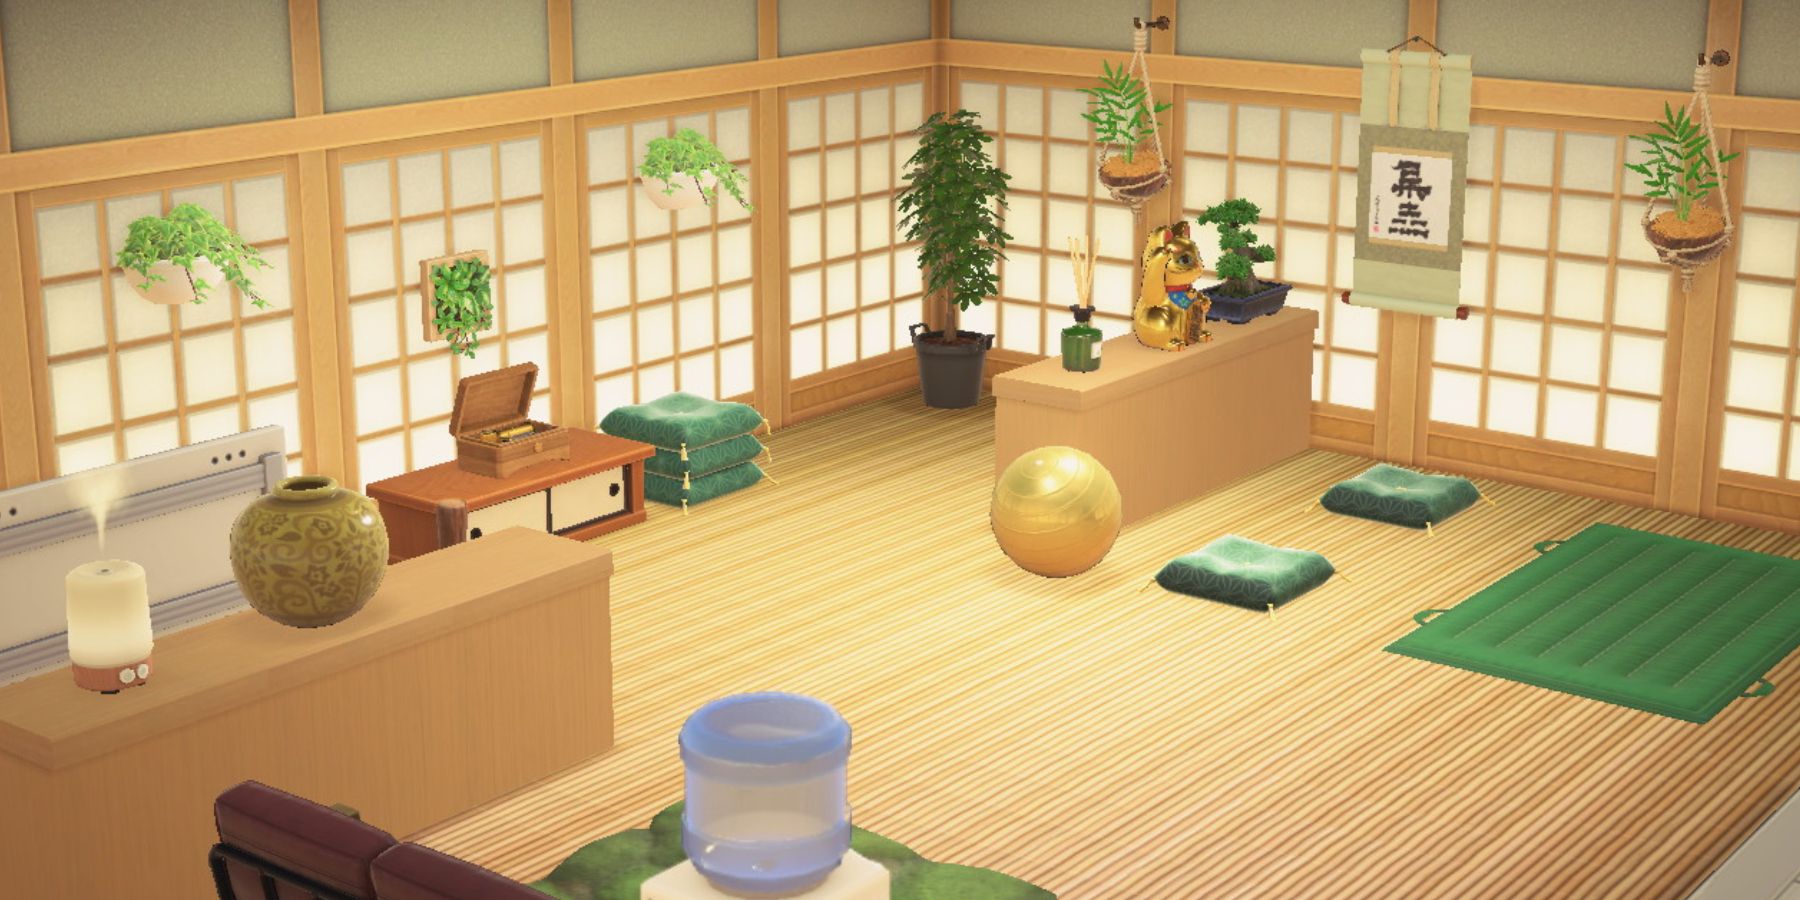 Players can design a wellness center in Animal Crossing Happy Home Paradise.